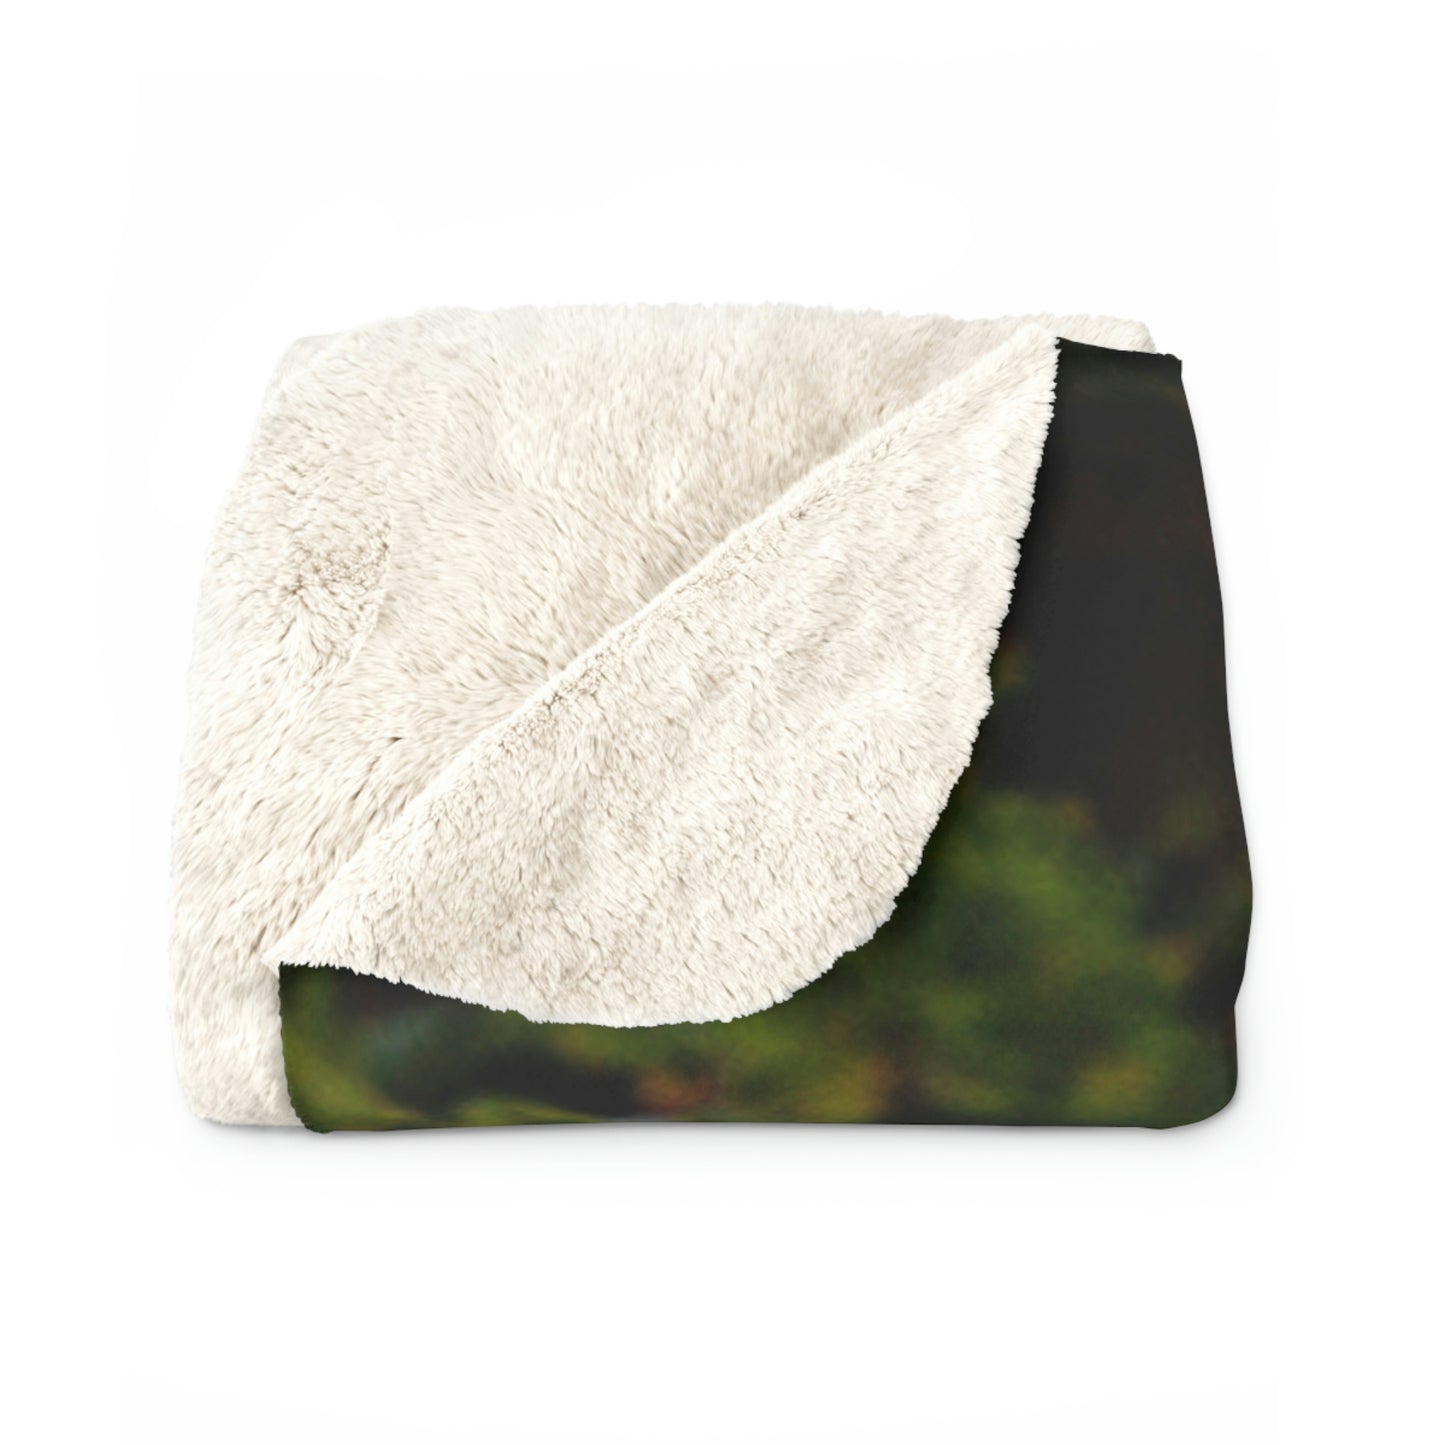 The Gnome's High-Rise Adventure - The Alien Sherpa Fleece Blanket